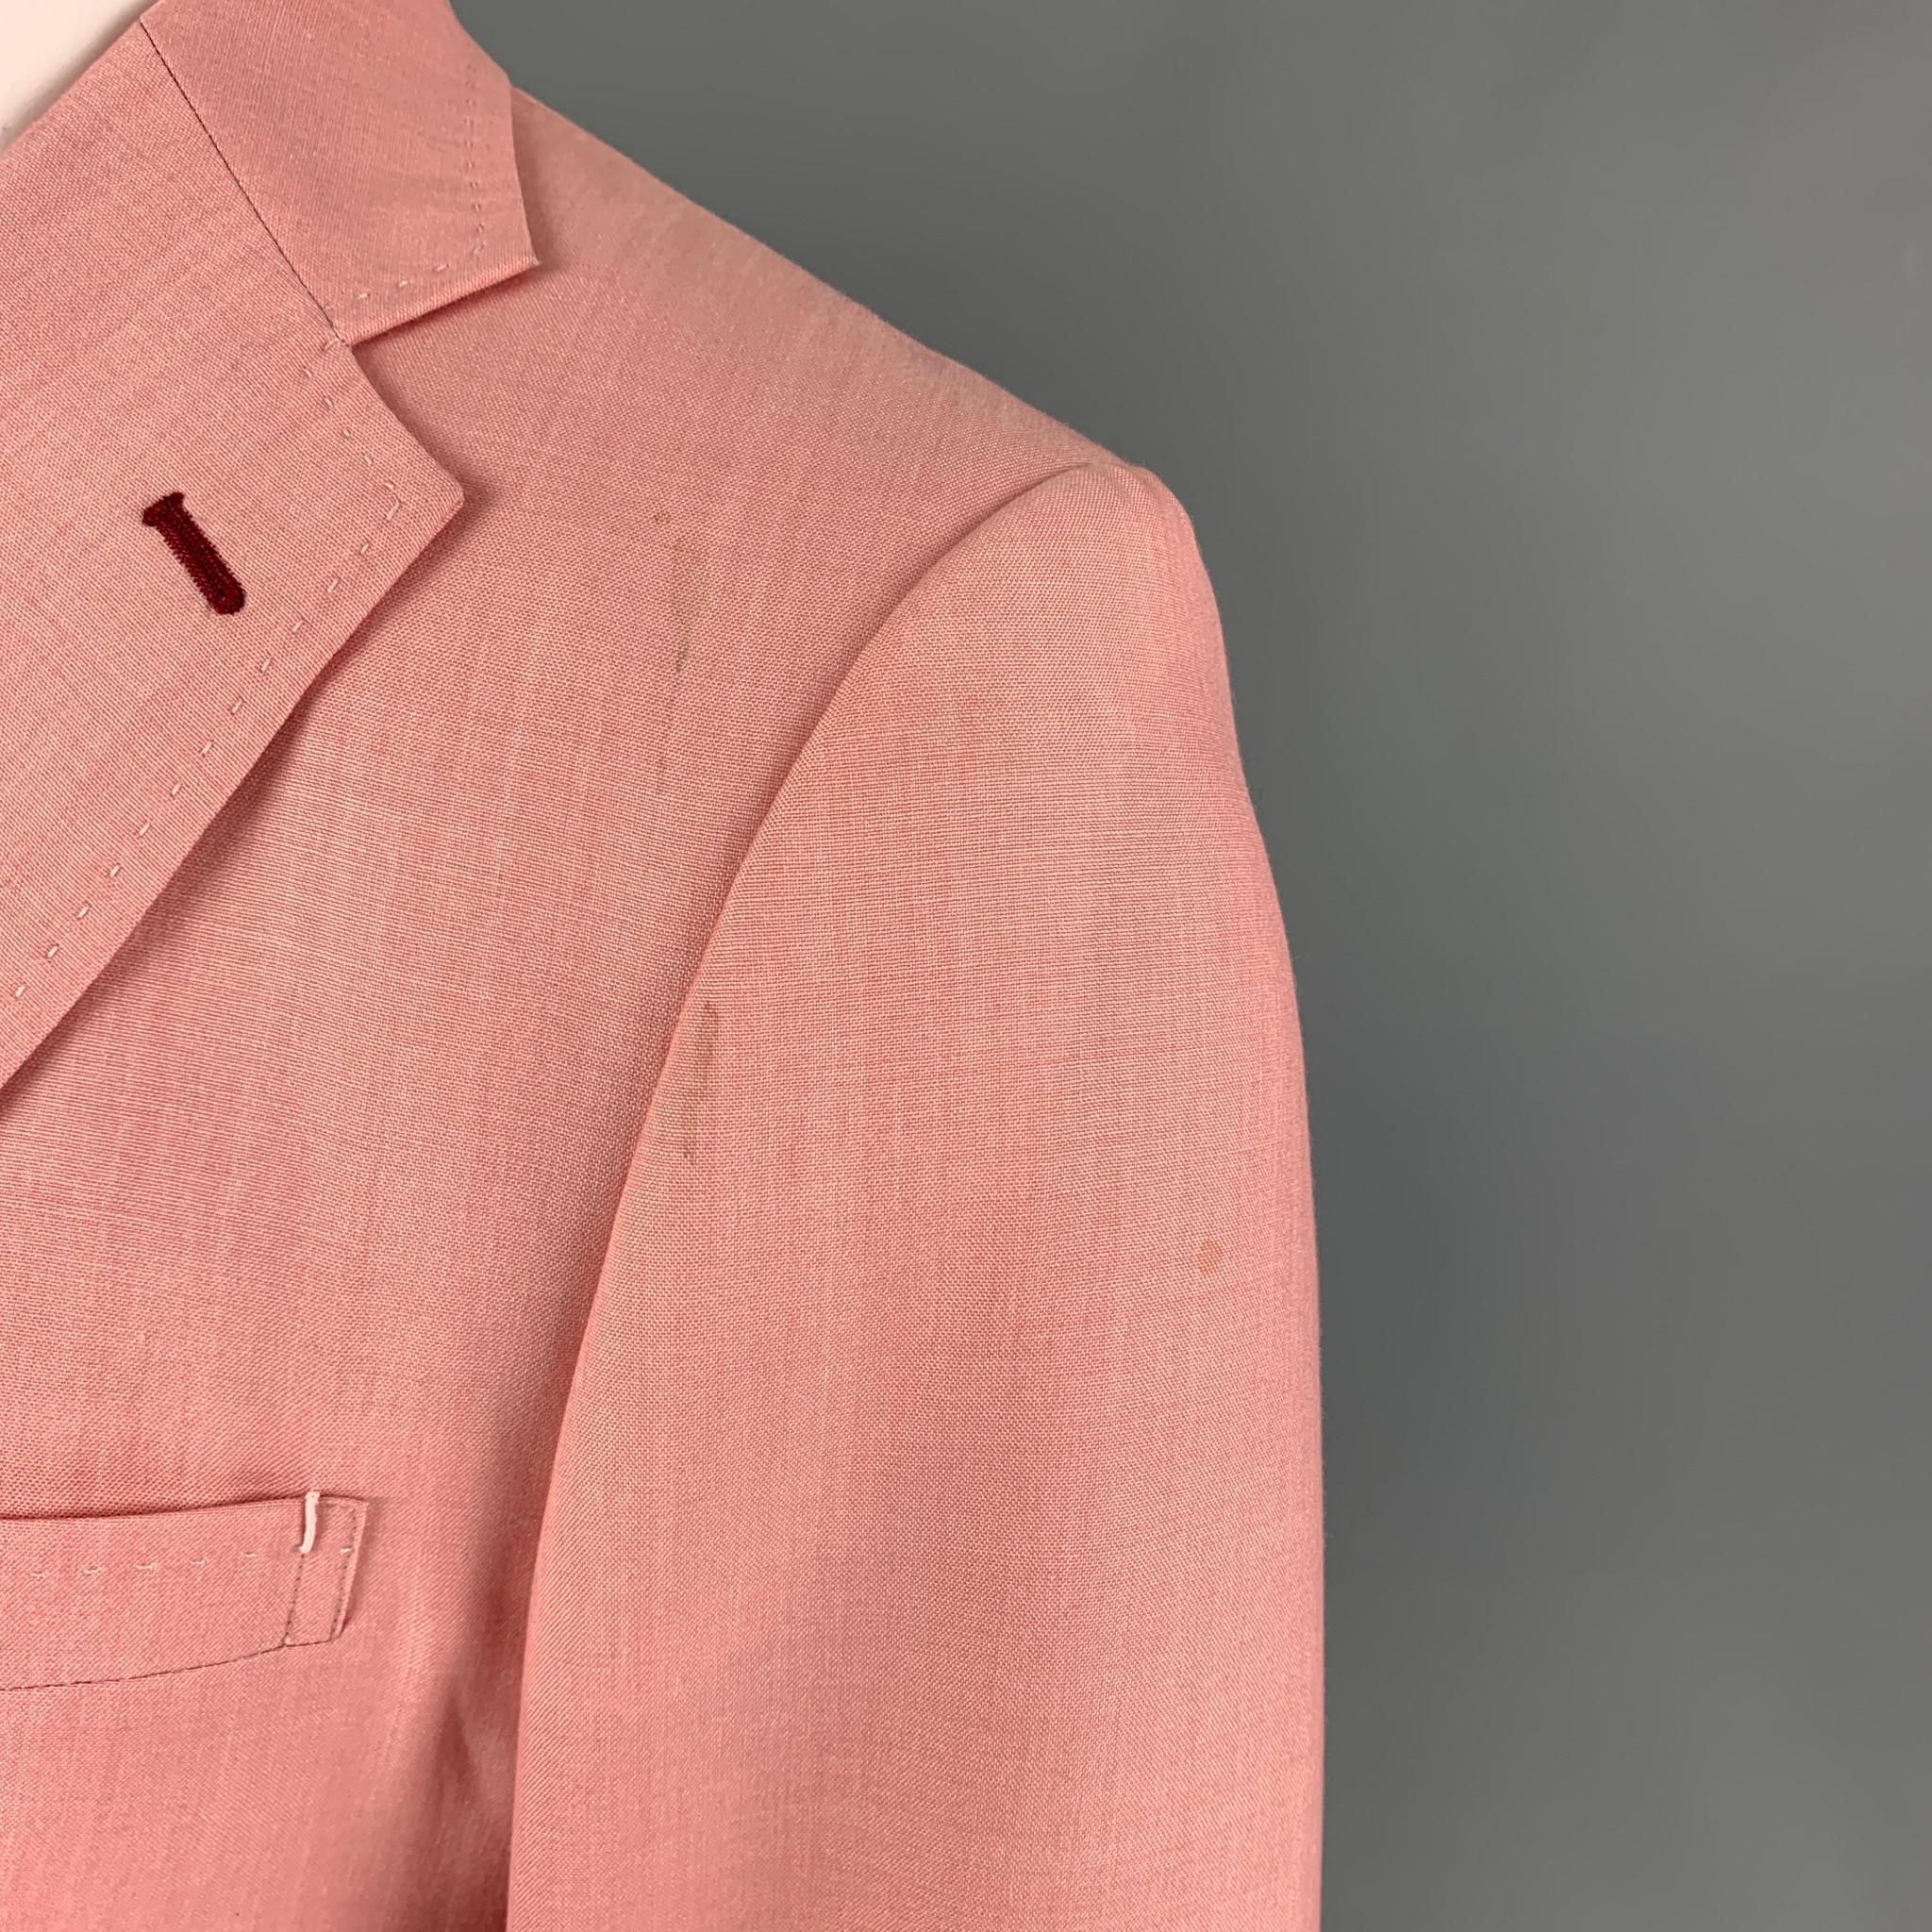 JUNYA WATANABE sport coat comes in a pink wool blend wth a half liner featuring a notch lapel, patch pockets, contrast stitching, single back vent, and a three button closure. Made in Japan. 

Very Good Pre-Owned Condition. Light discoloration at